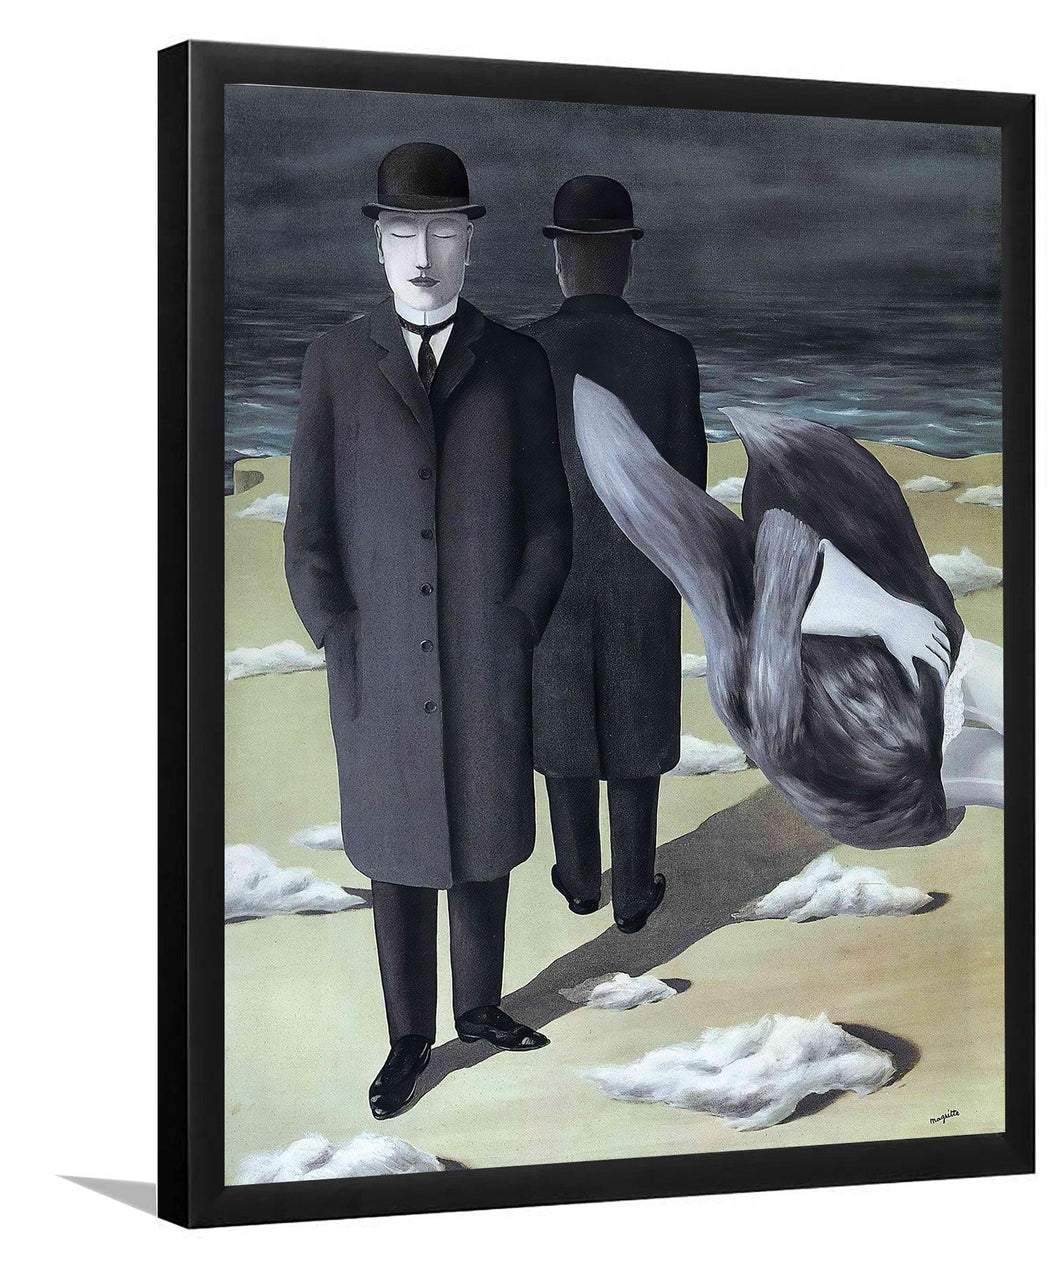 The Meaning Of Night 1927 by Rene Magritte-Art Print, Frame Art, Plexiglas Cover